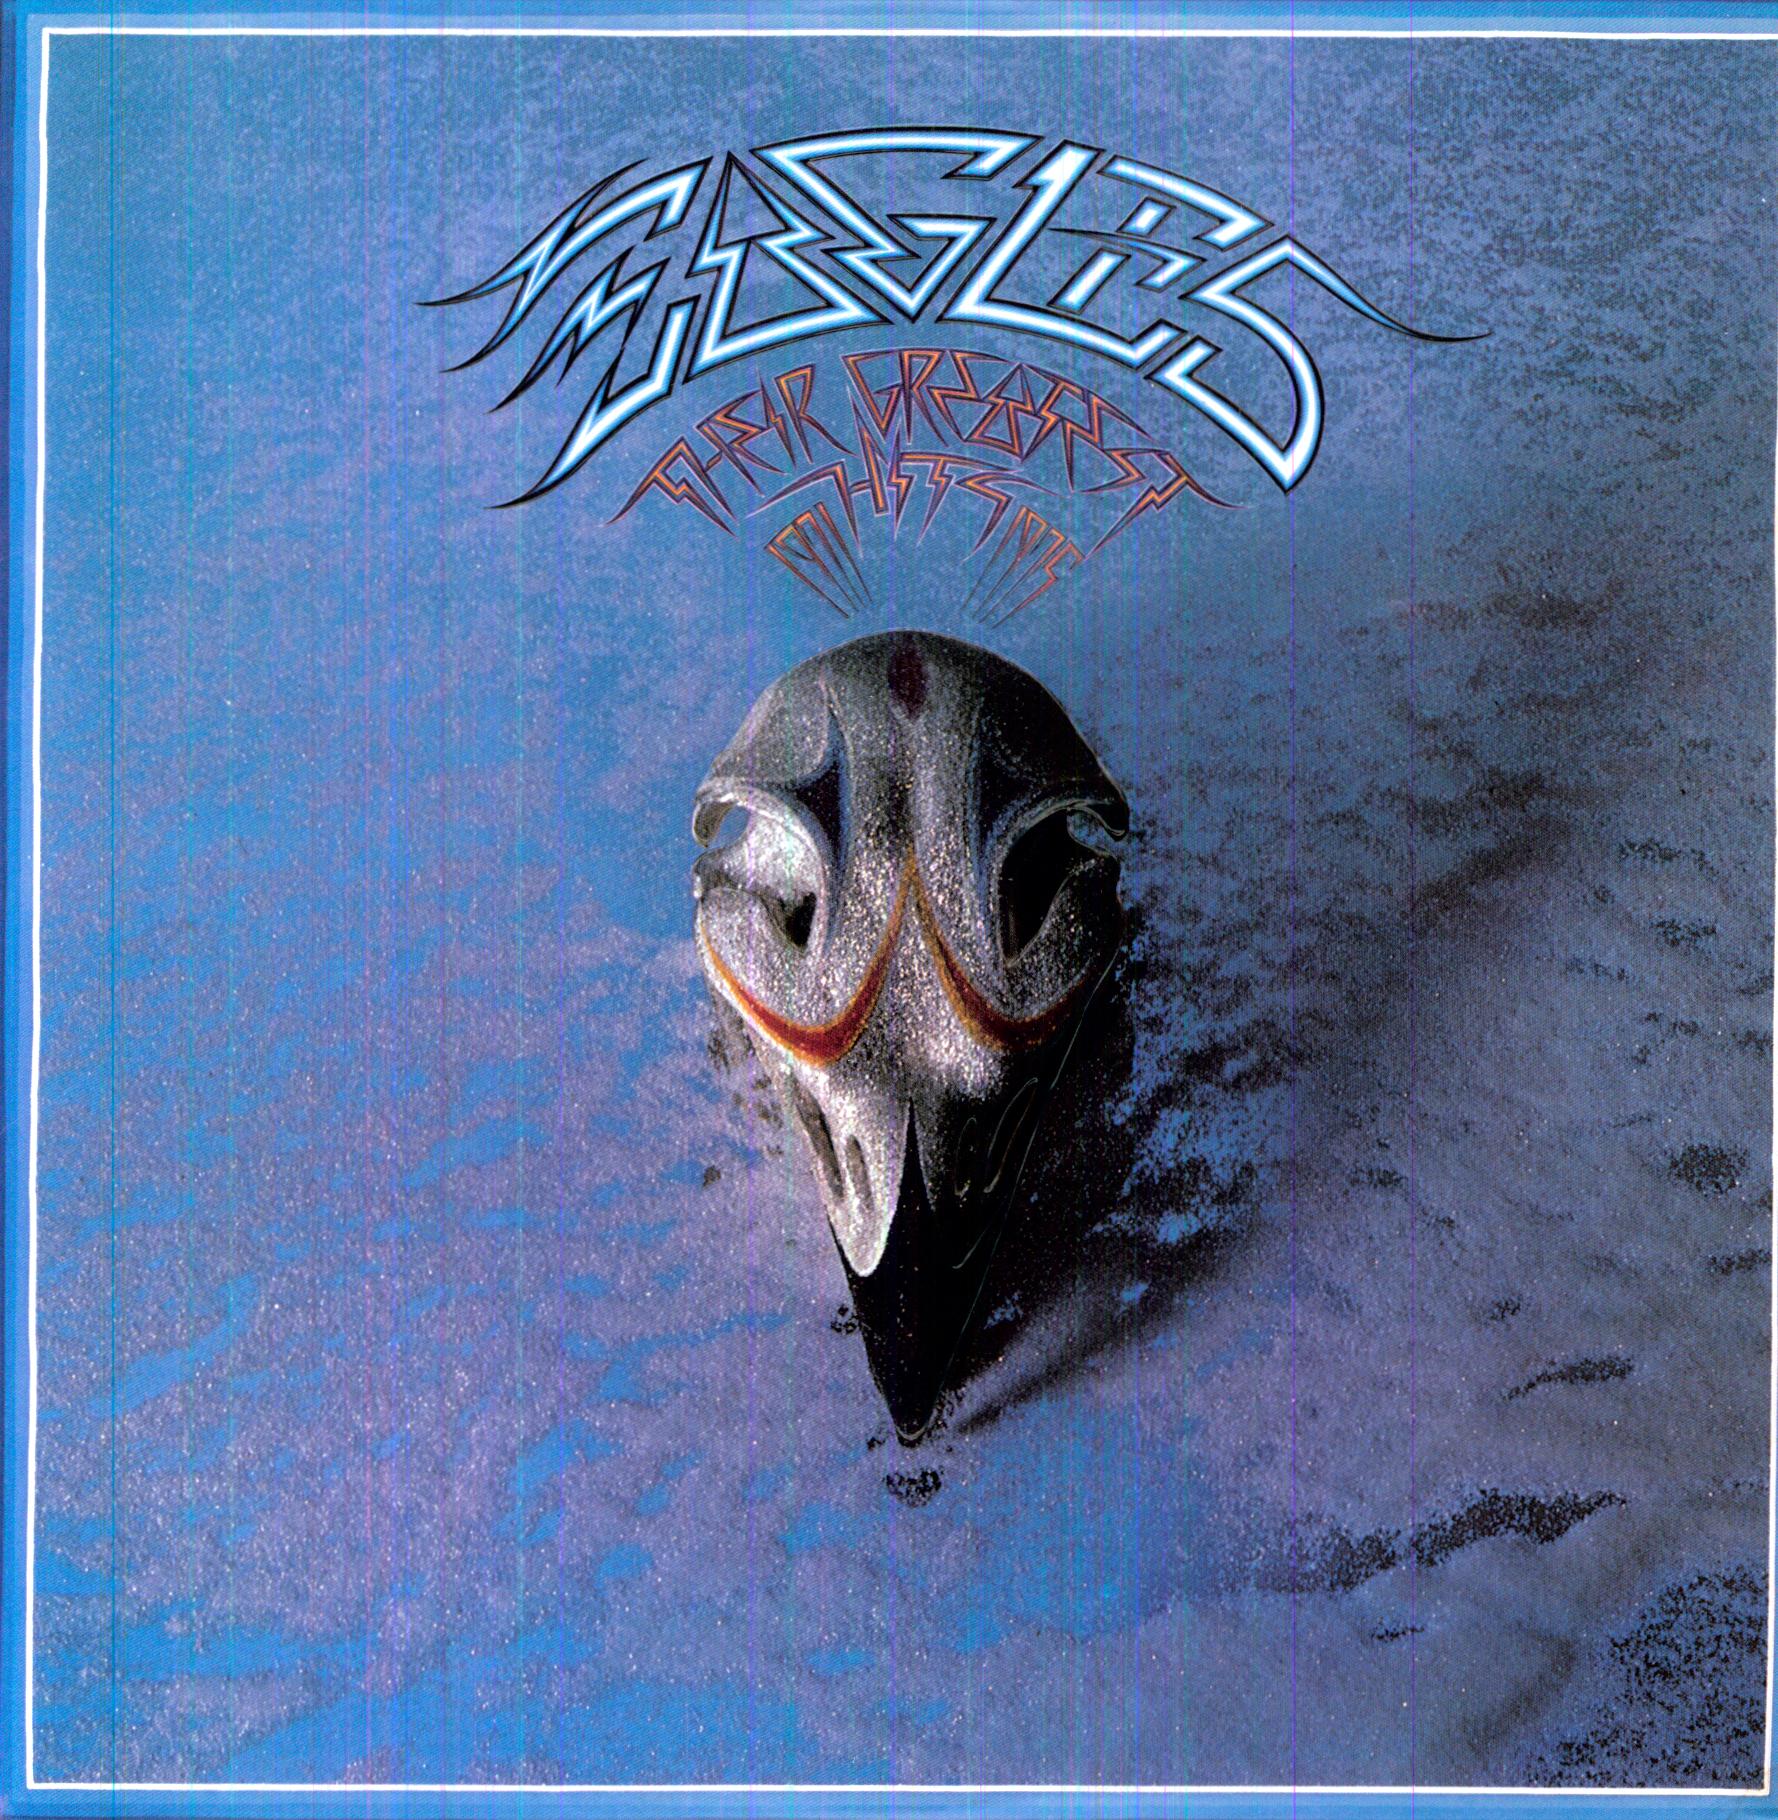 THEIR GREATEST HITS 1971-1975 (OGV)